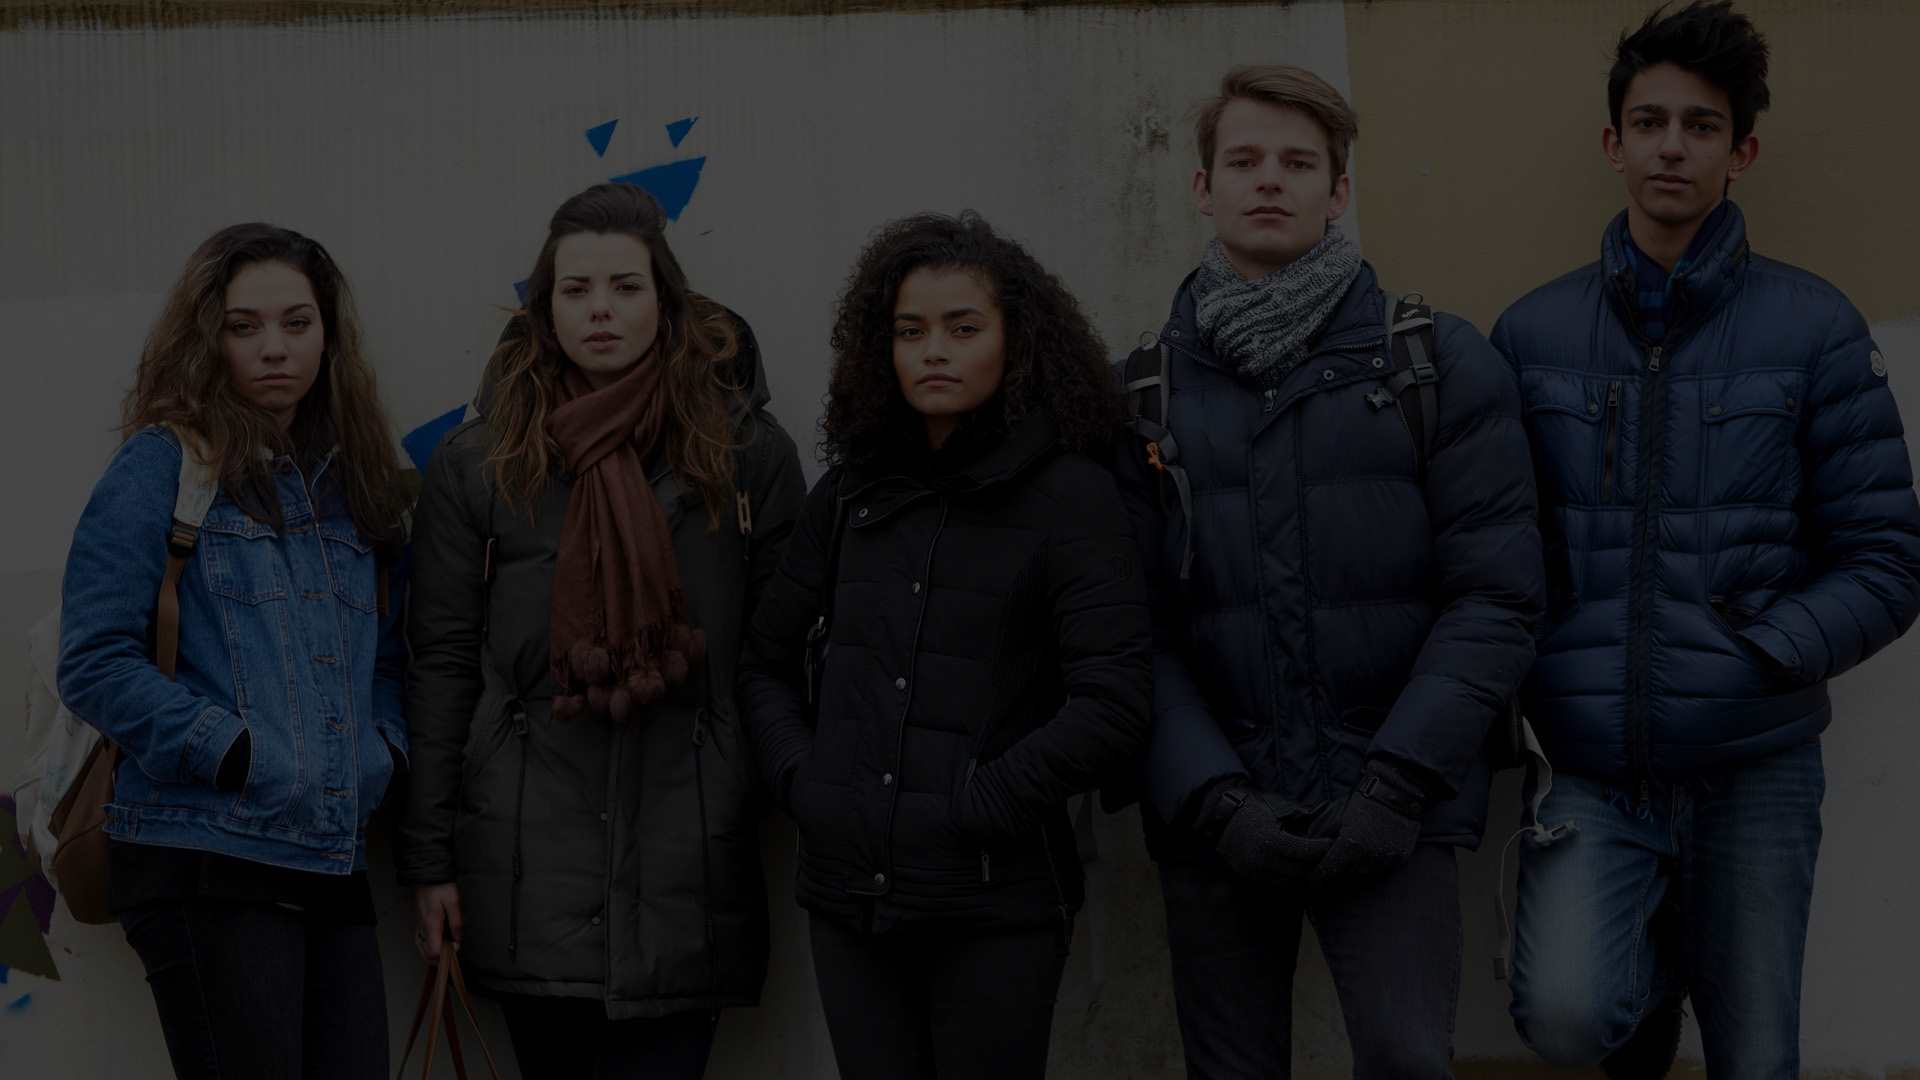 Five young people standing against a brick wall